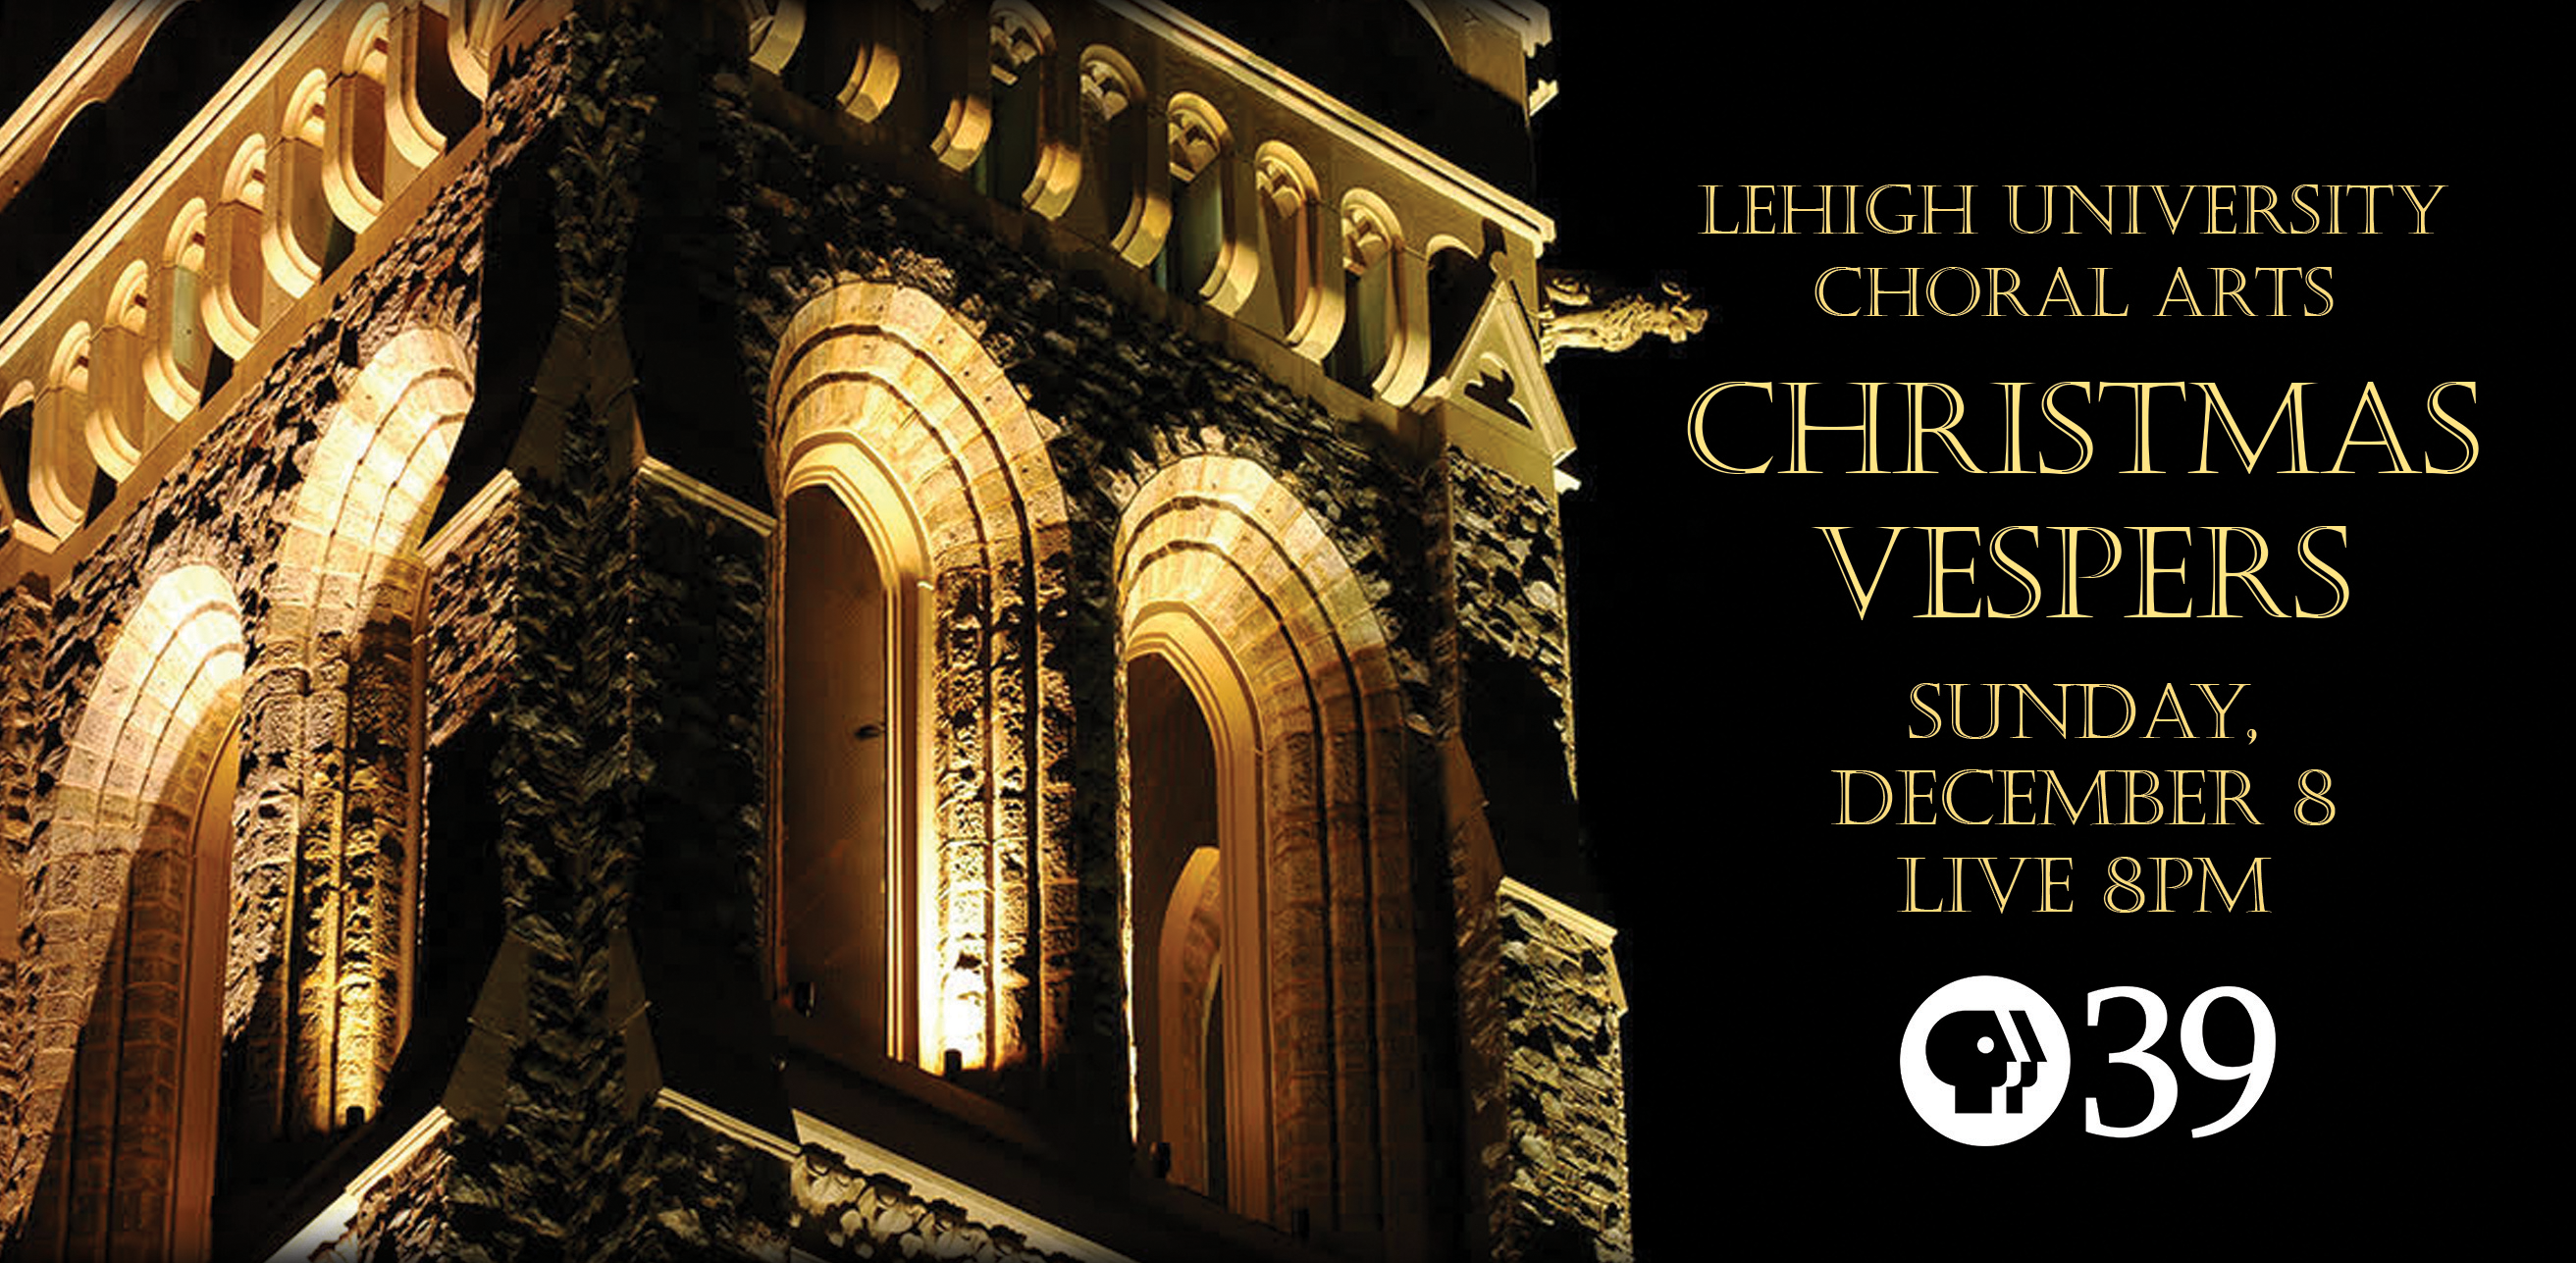 PBS39 to Broadcast Lehigh University’s Christmas Vespers Show on December 8, 2019